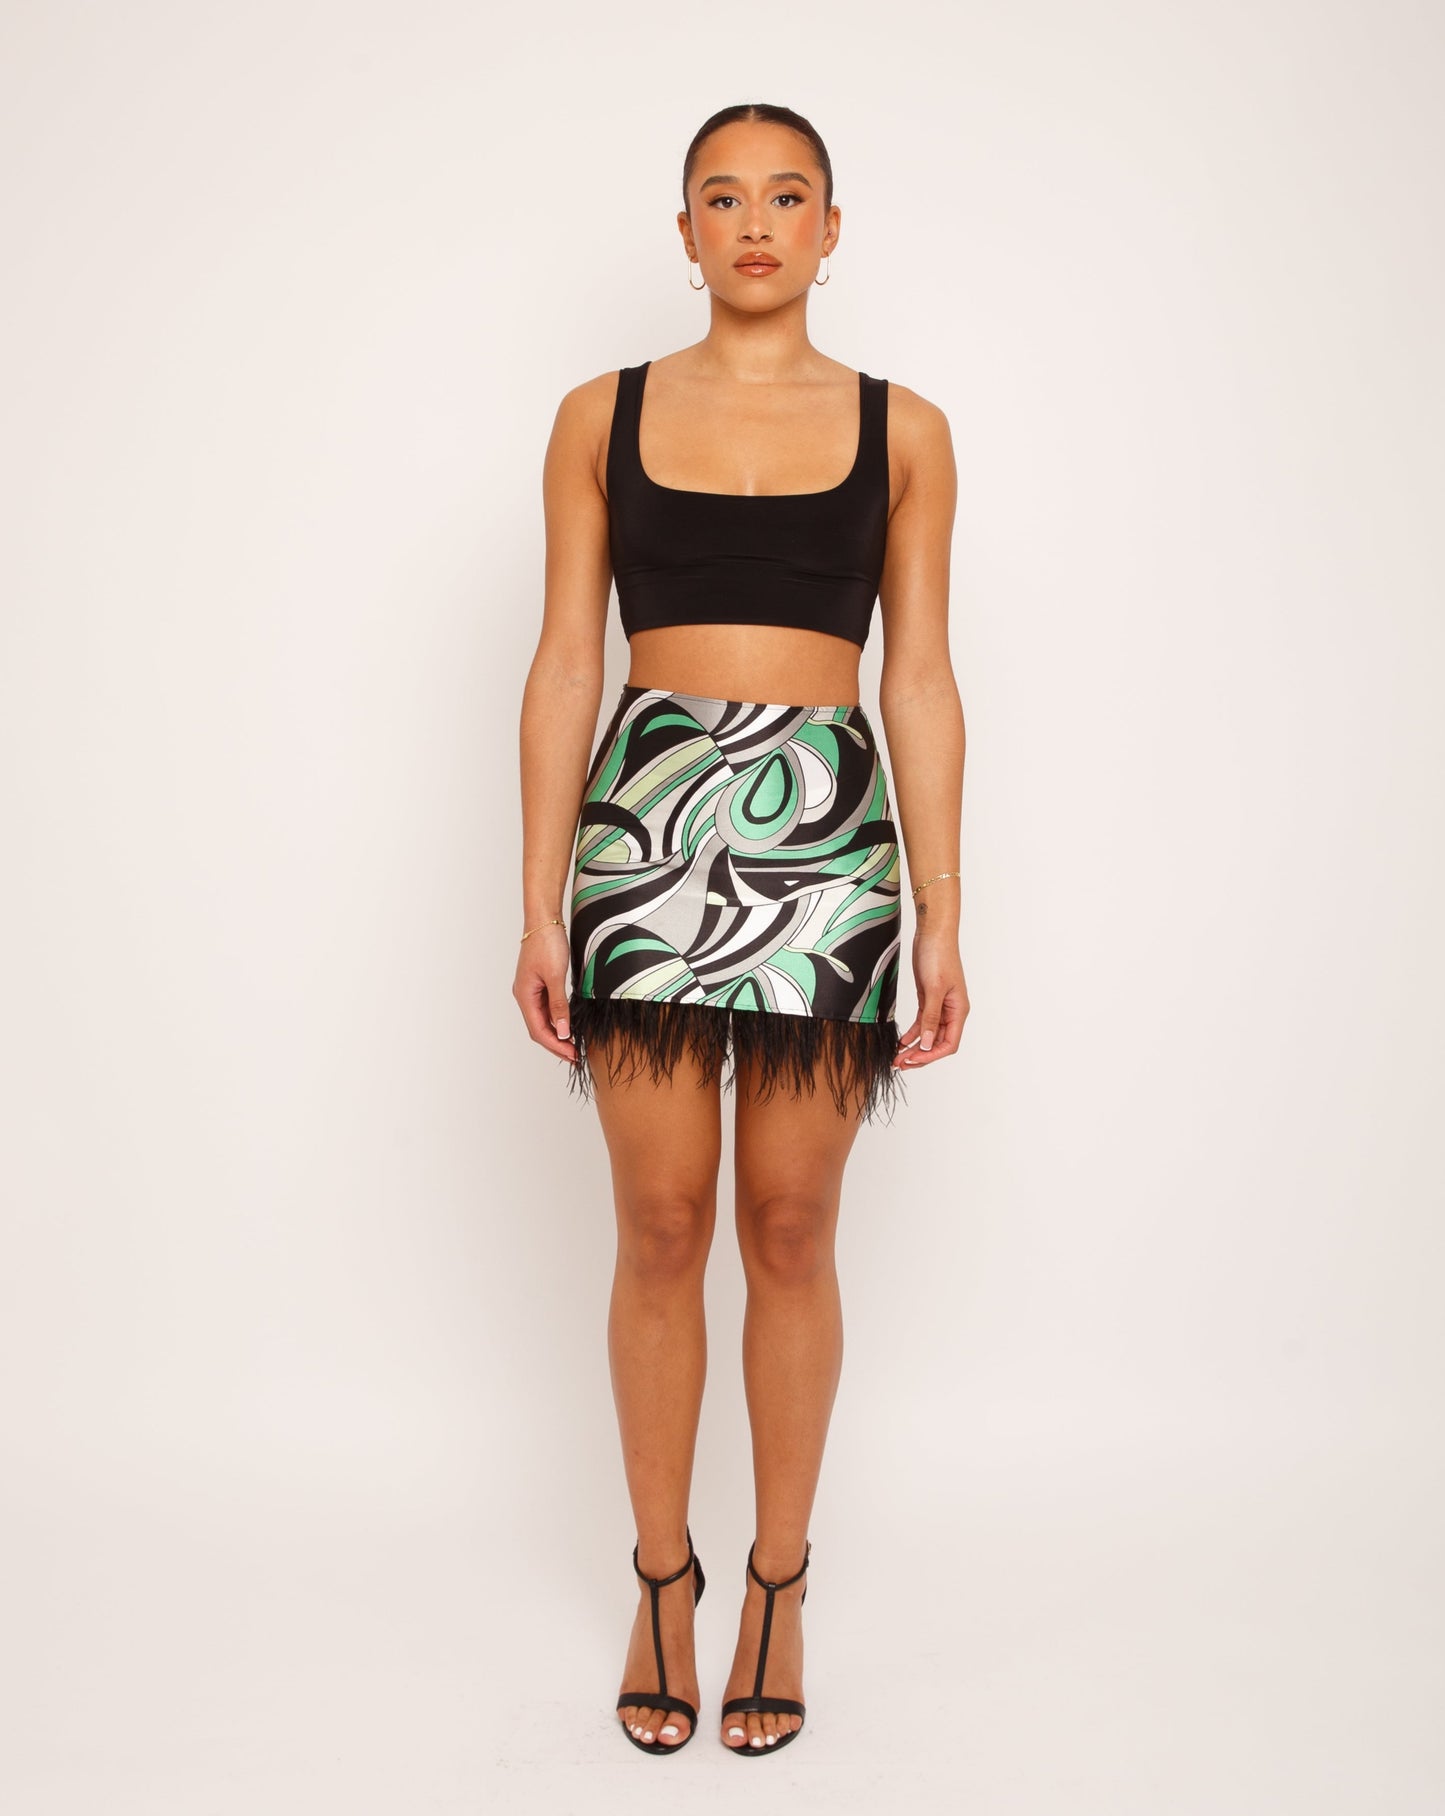 Abstract printed satin mini skirt. Black feather detail